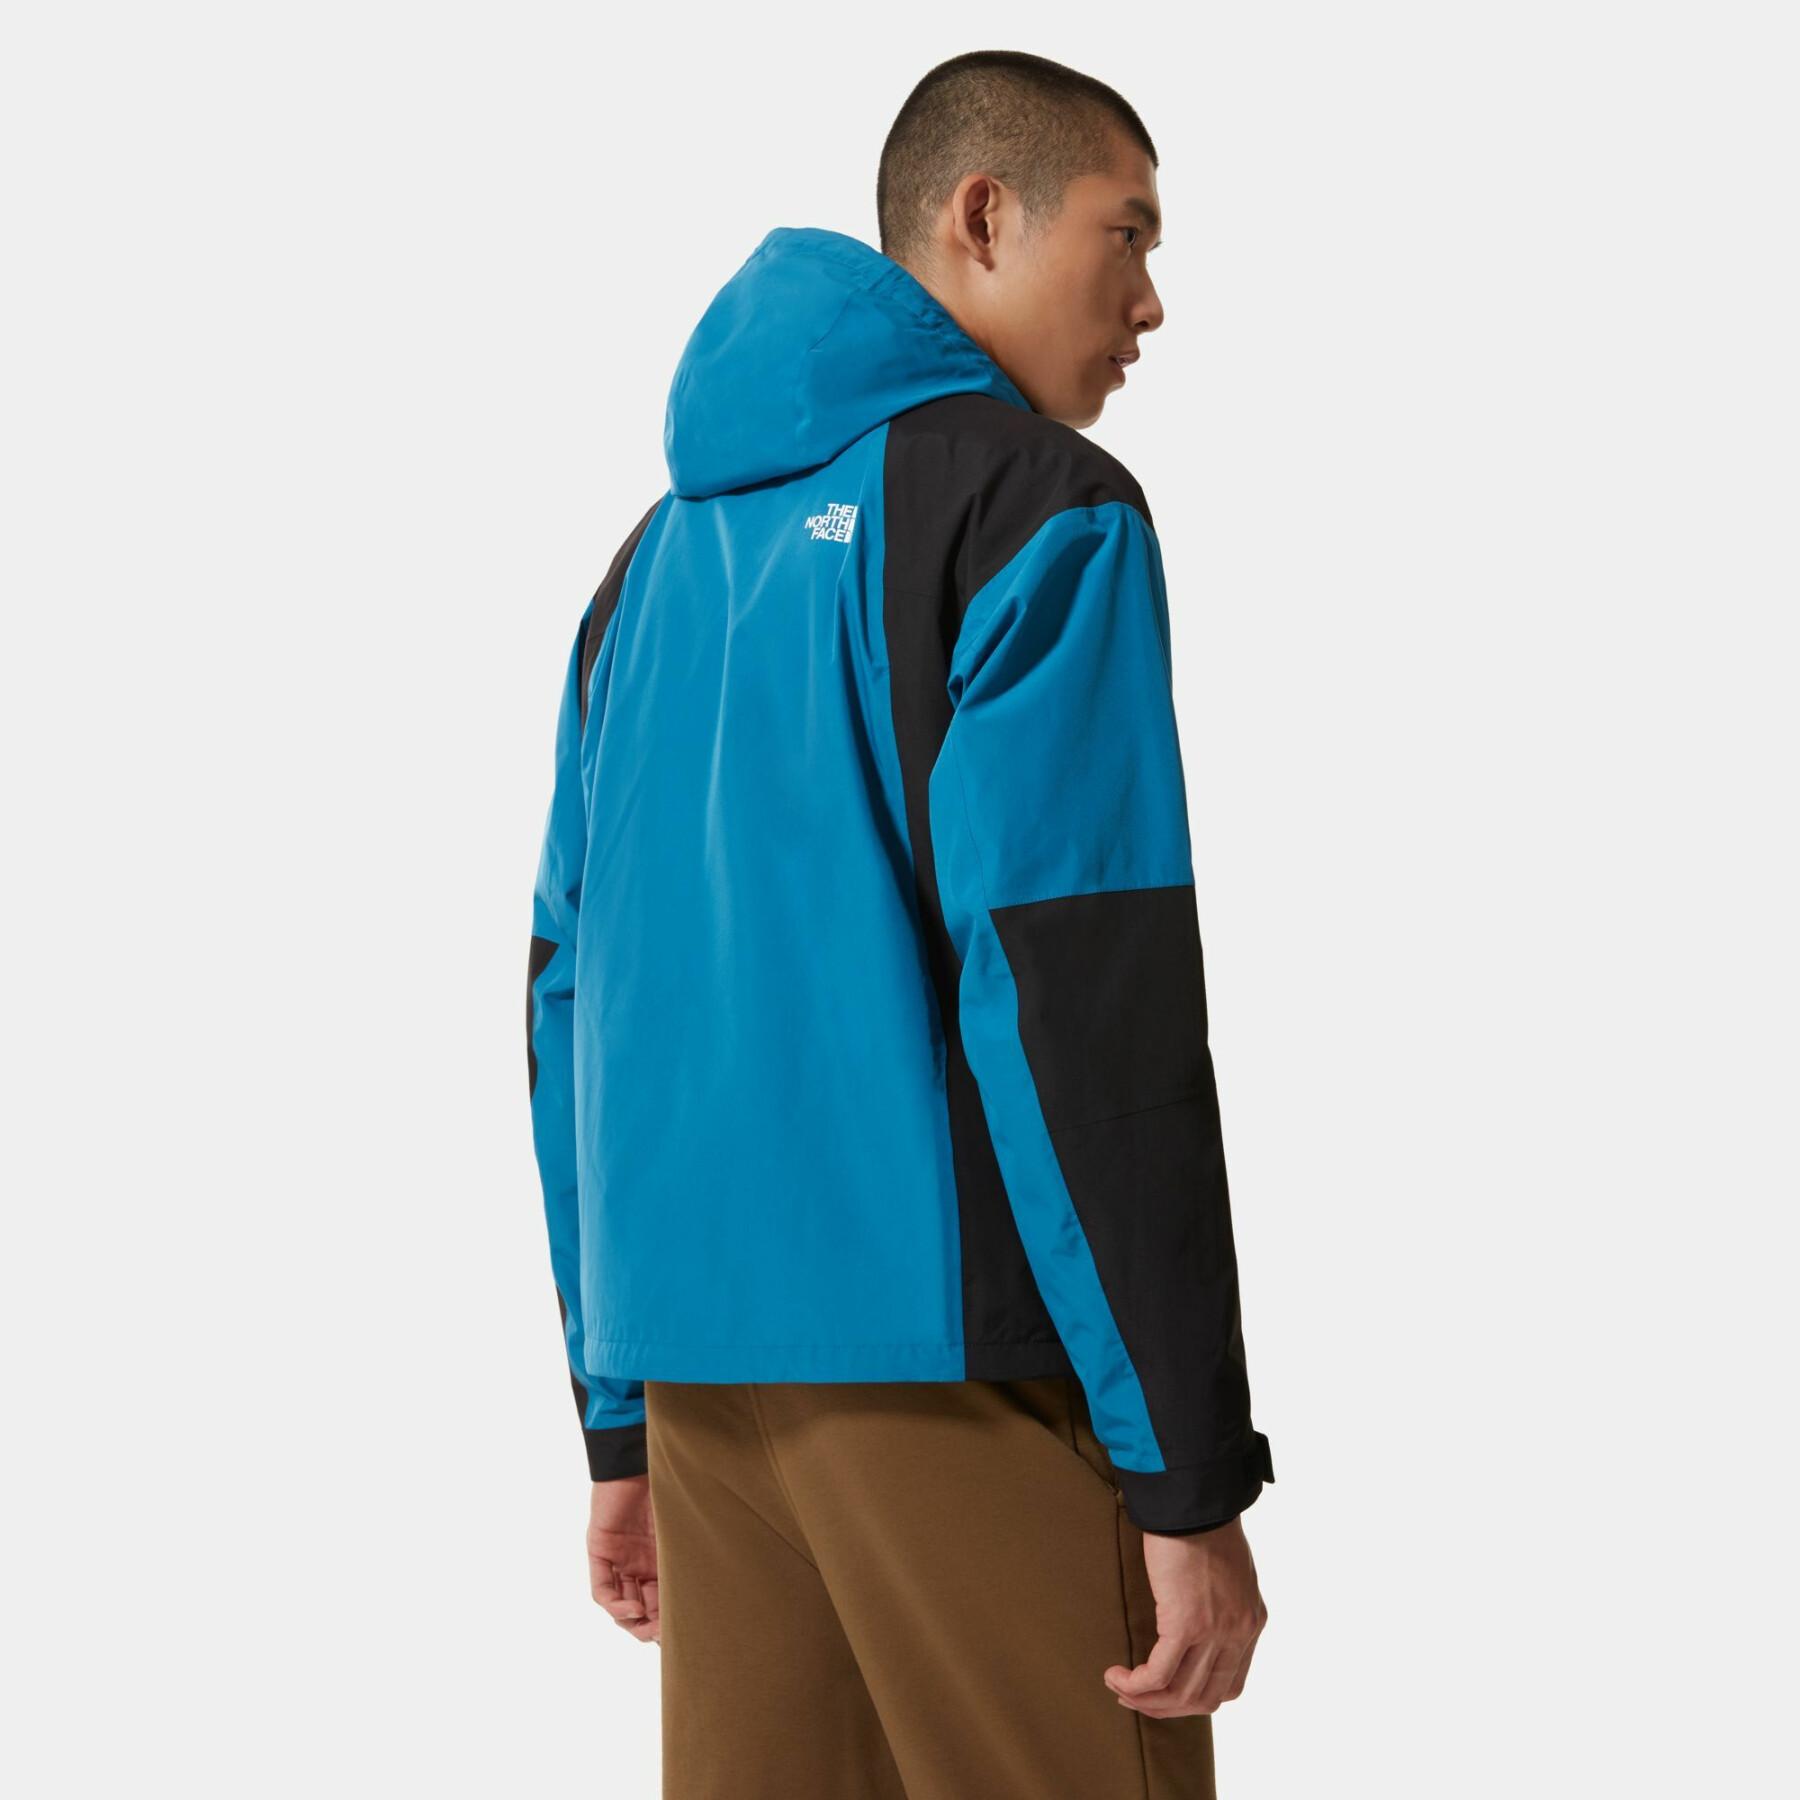 Waterproof jacket The North Face 2000 Mountain